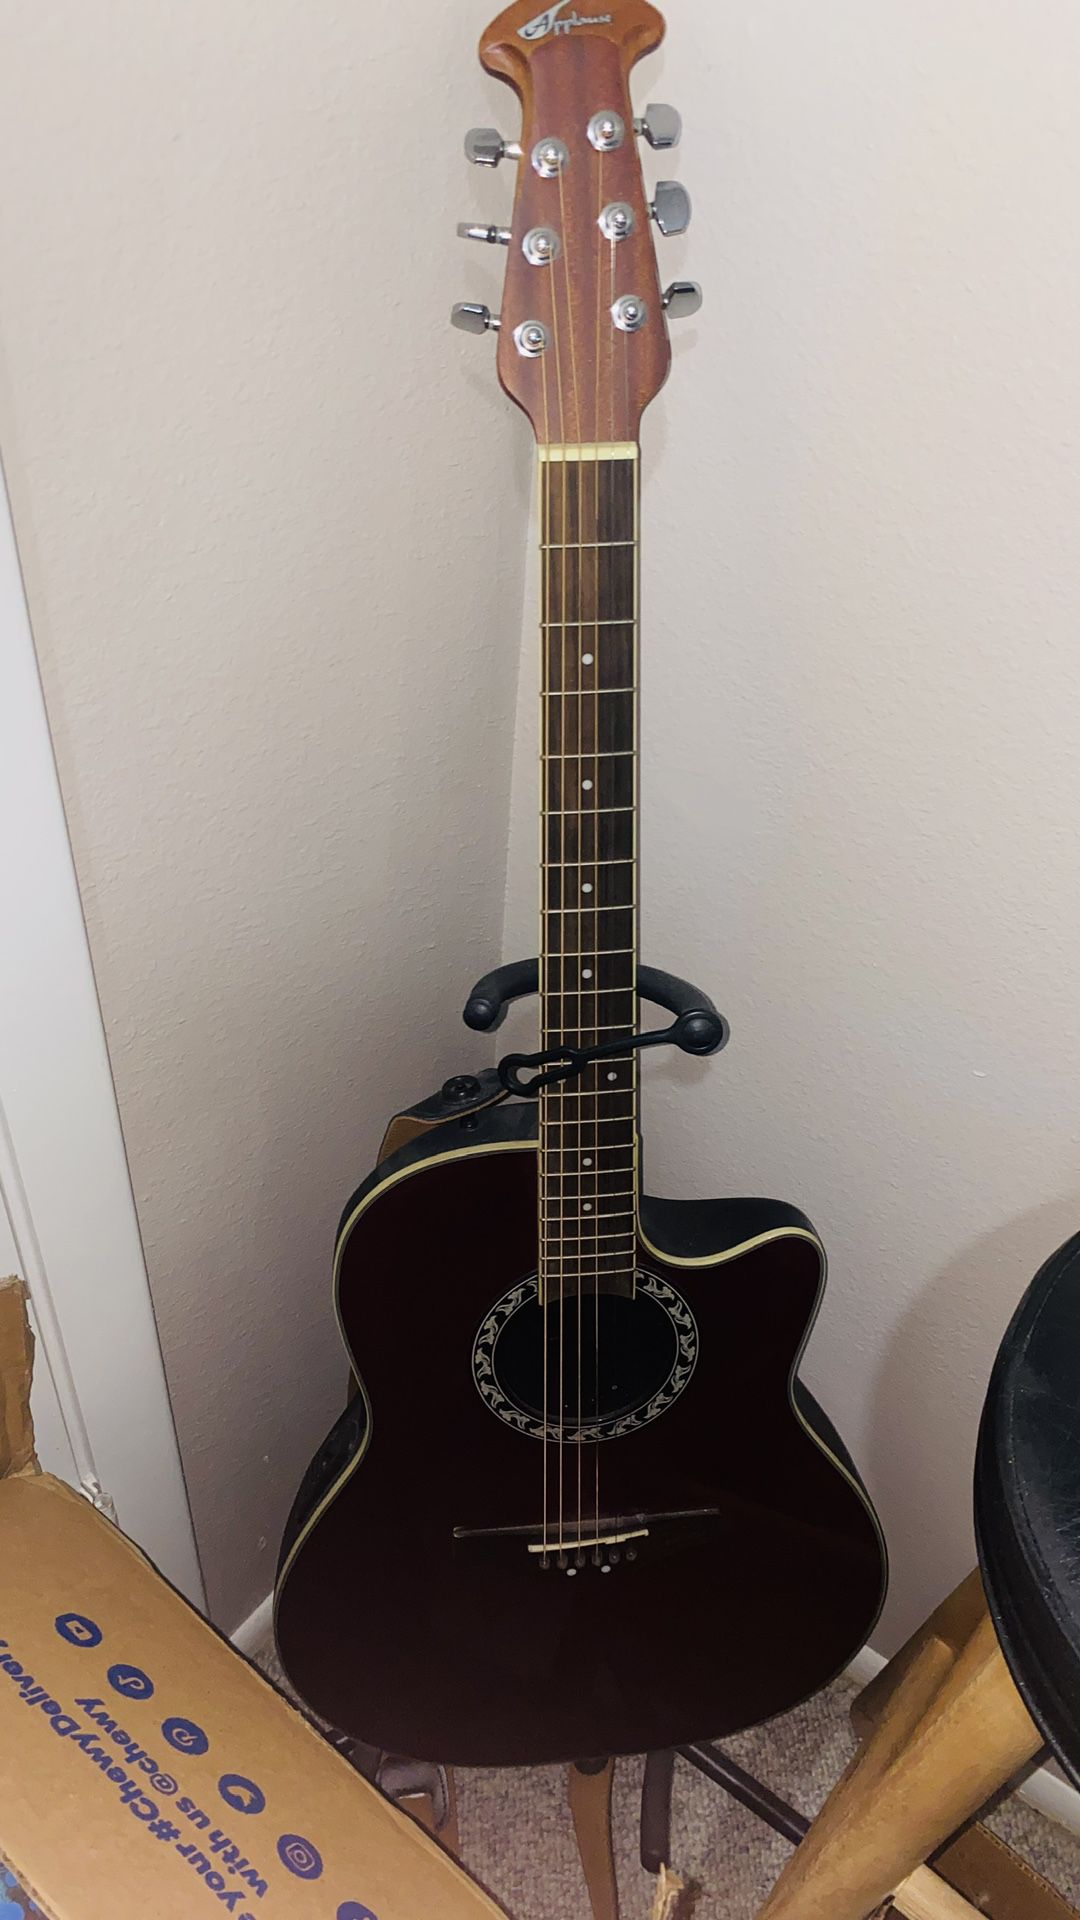 Ovation By applause Guitar Acoustic Electric